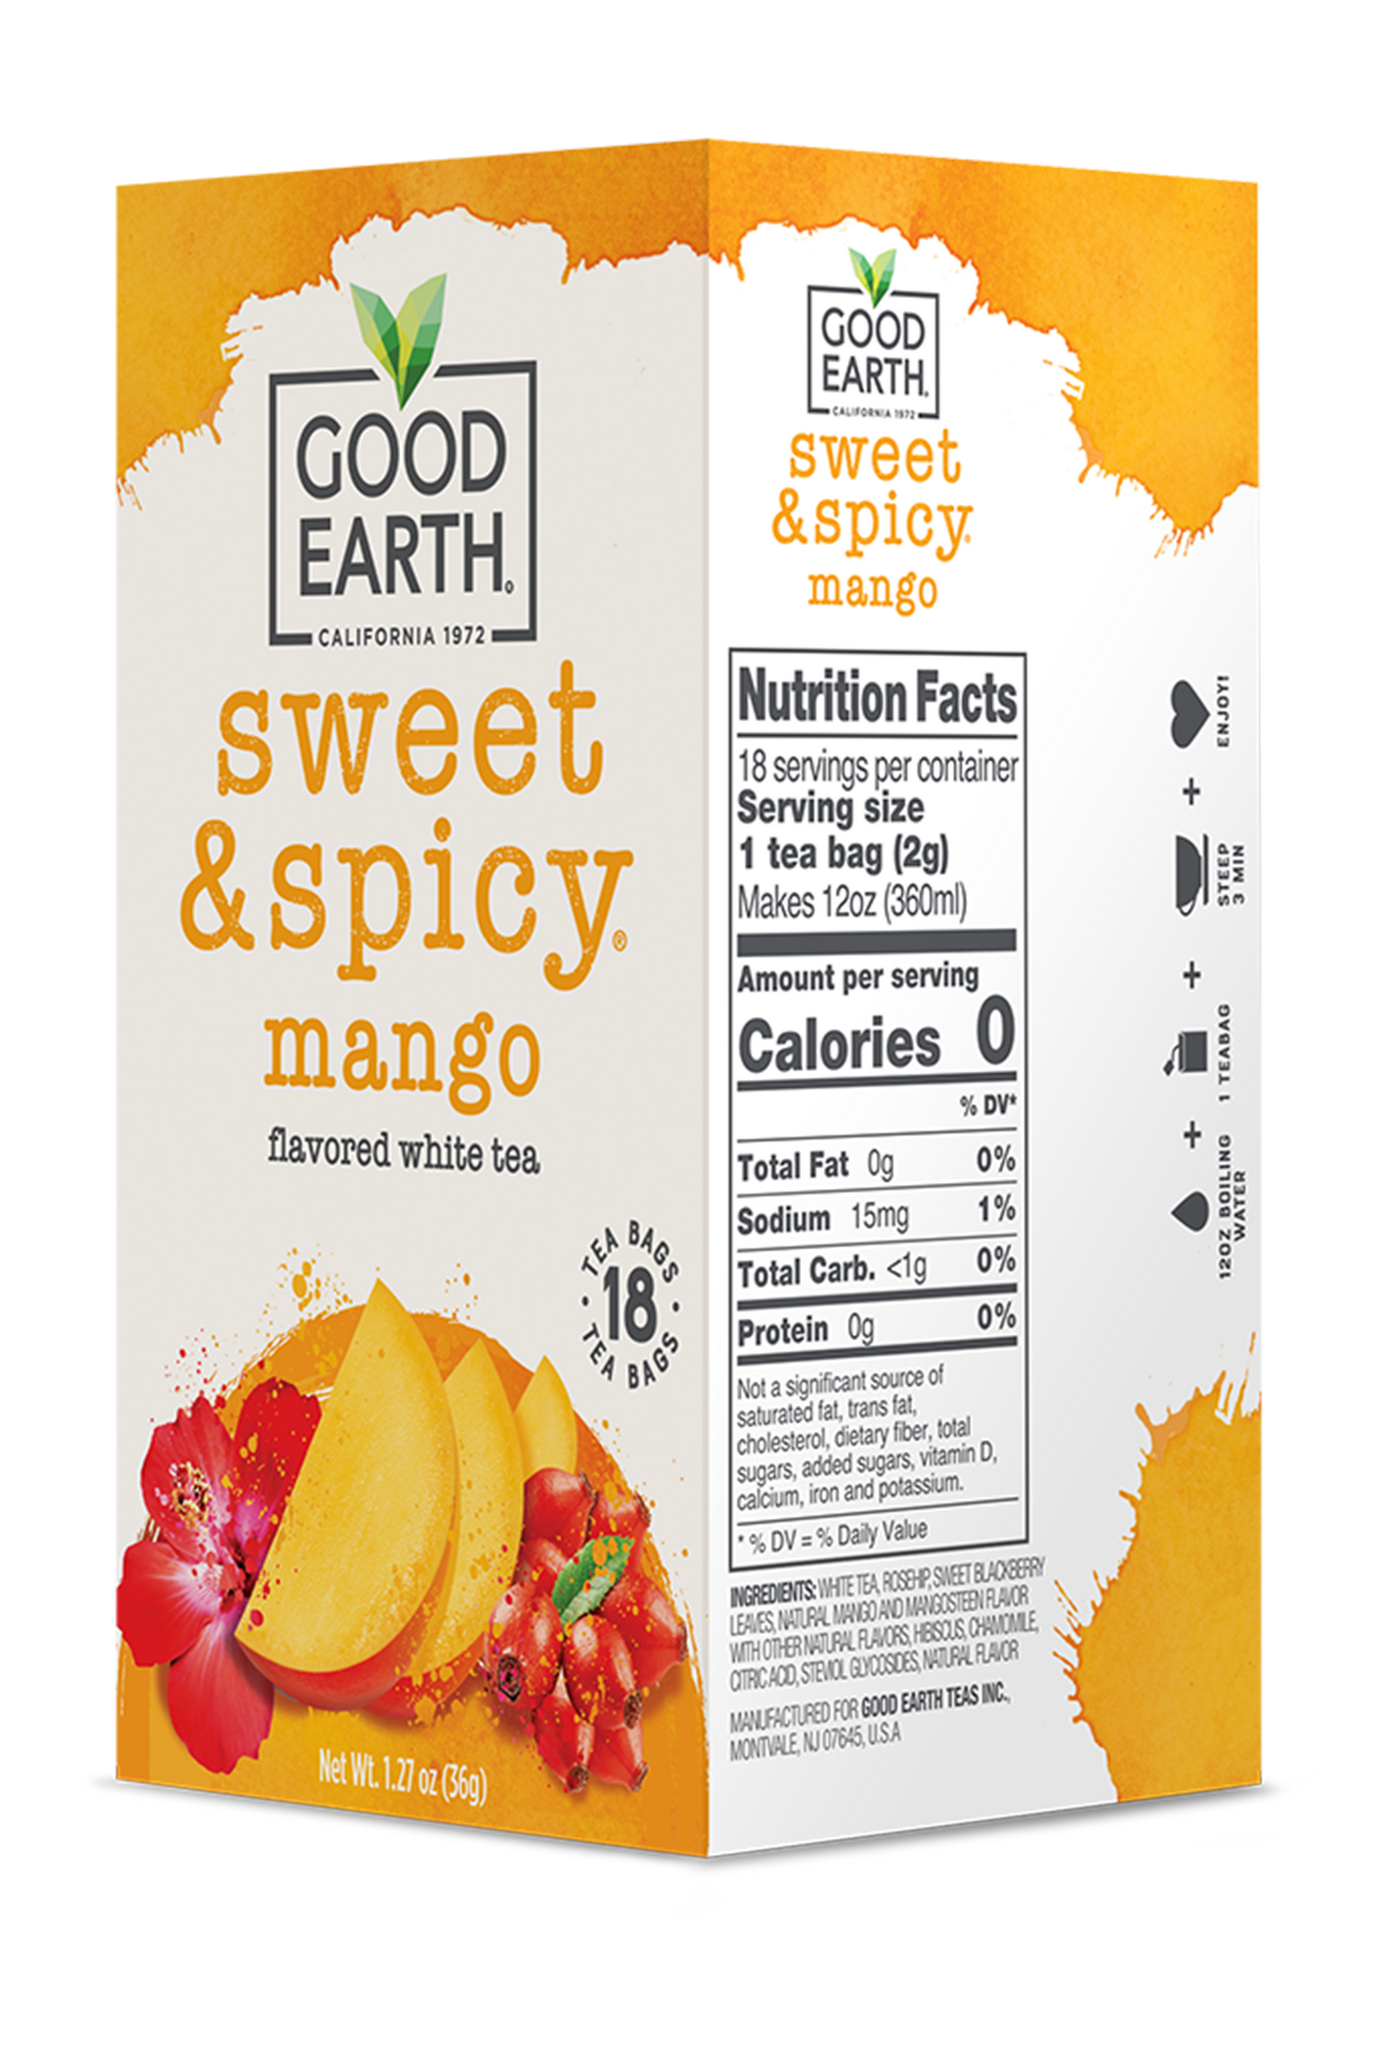 Sweet & Spicy Mango Nutrition Facts see below